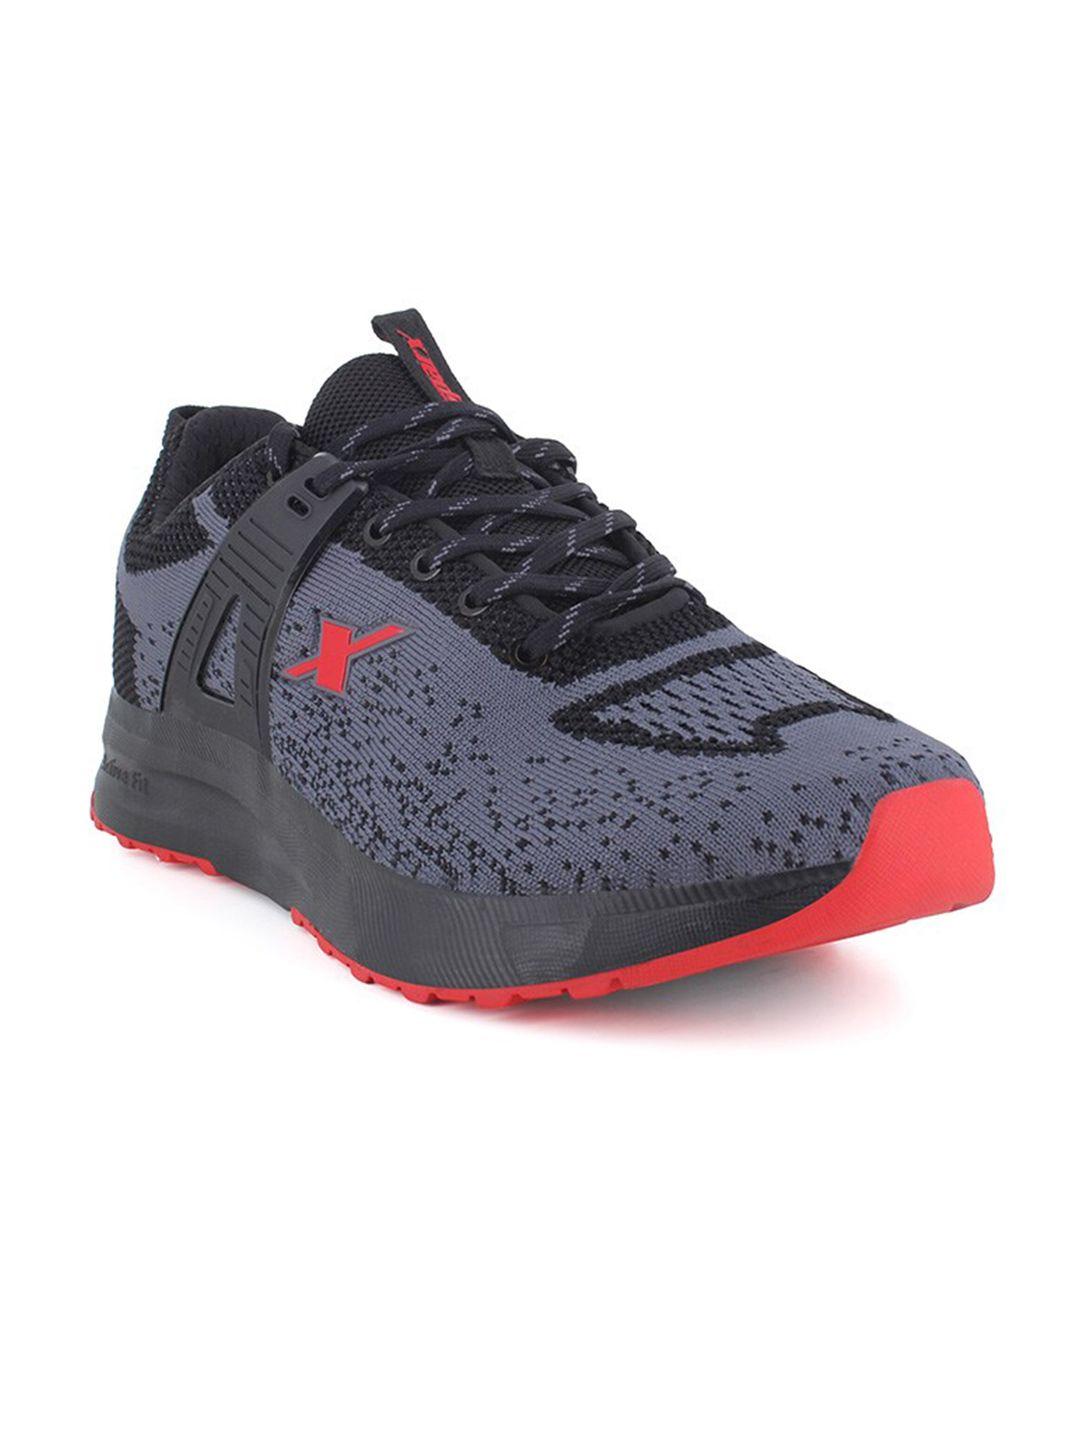 sparx men textile running non-marking sports shoes